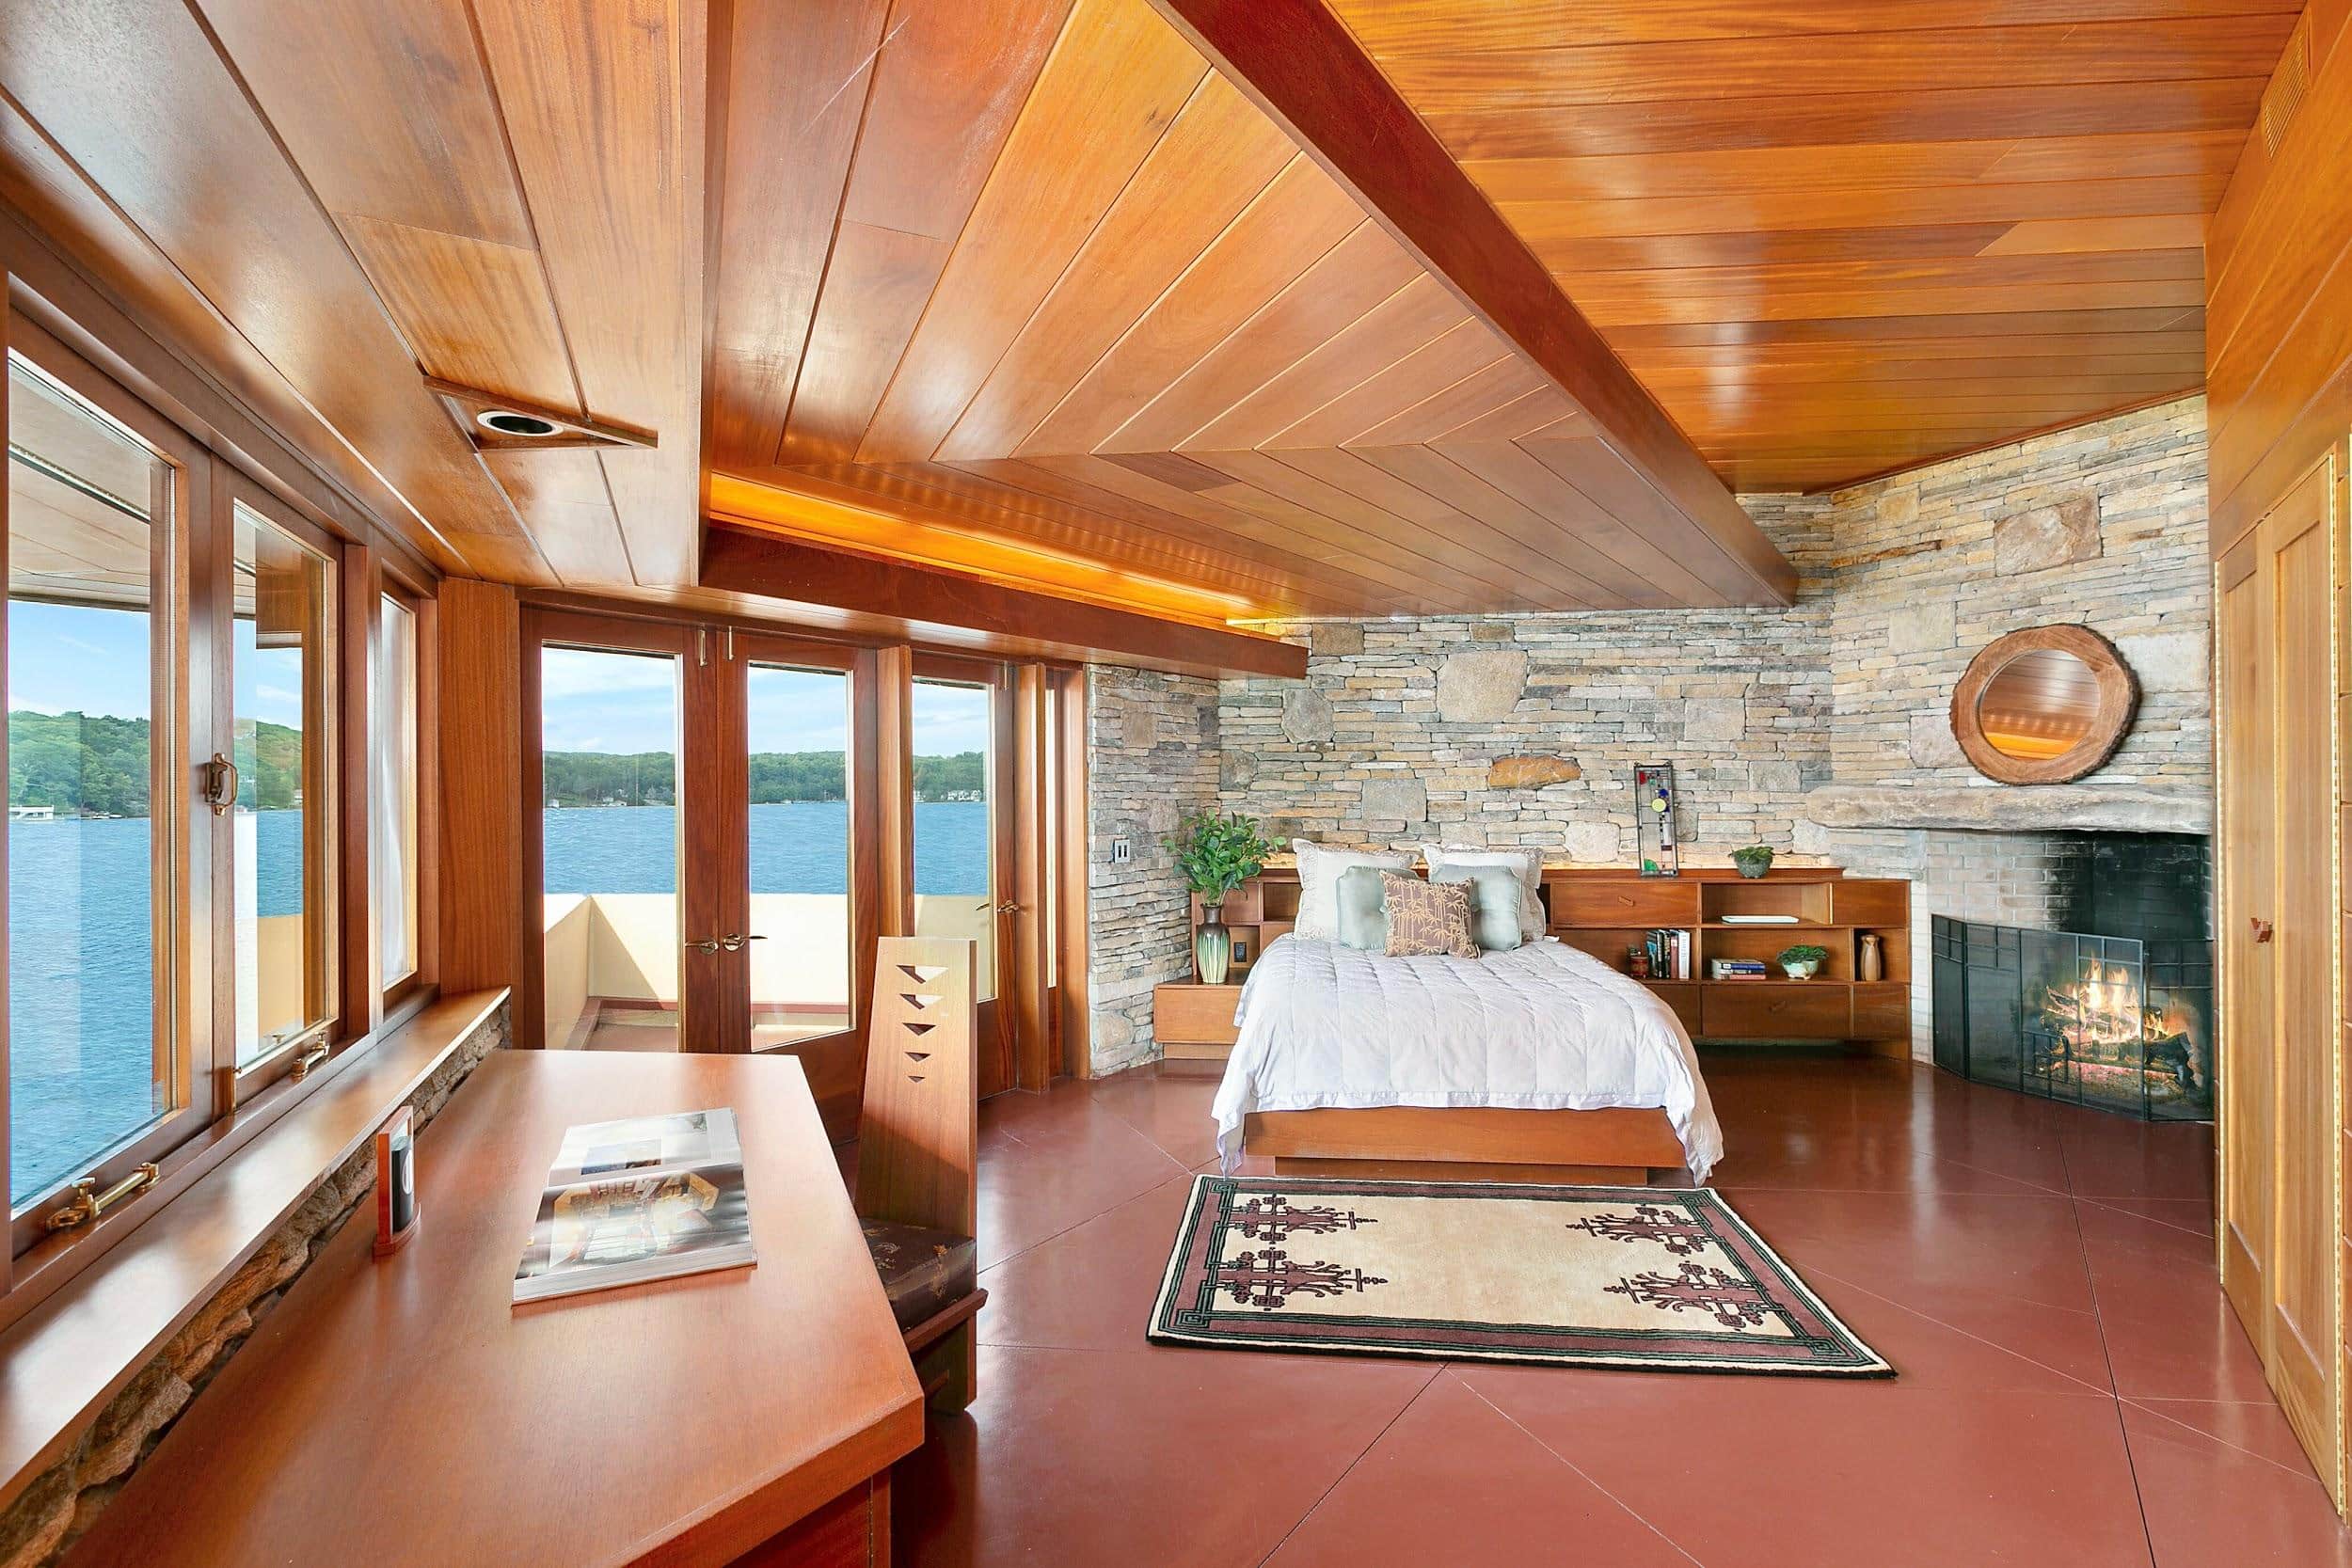 A Private Island With Two Historically Significant Frank Lloyd Wright Homes